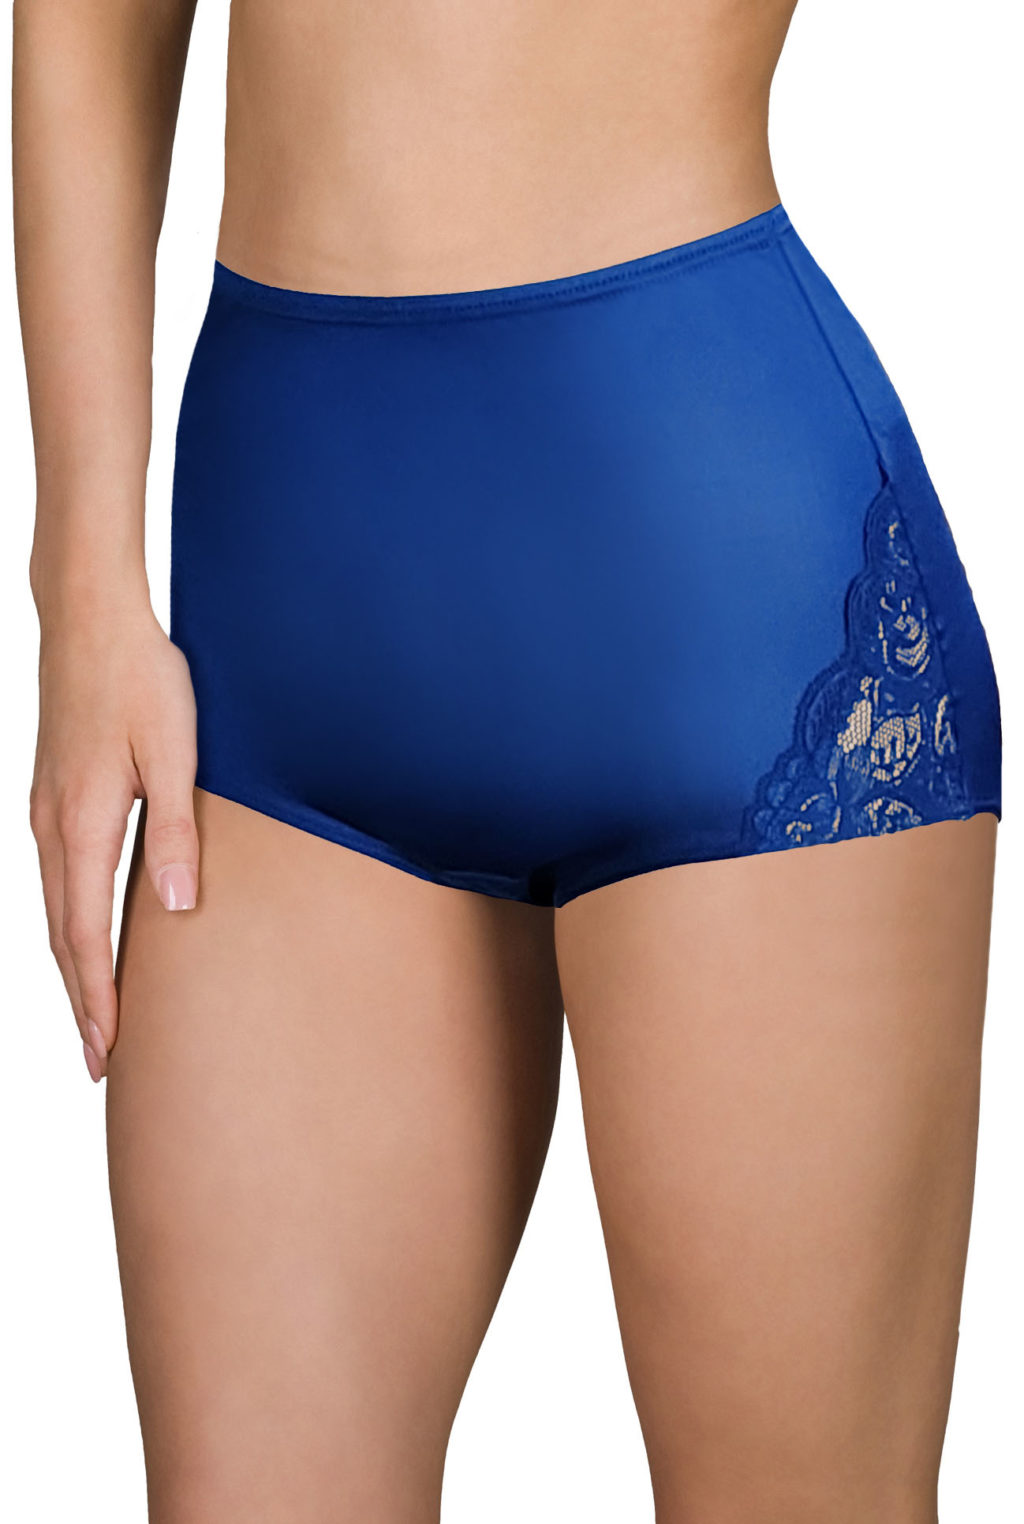 product image Shadowline 17082 high waist nylon panty with lace - navy blue low res